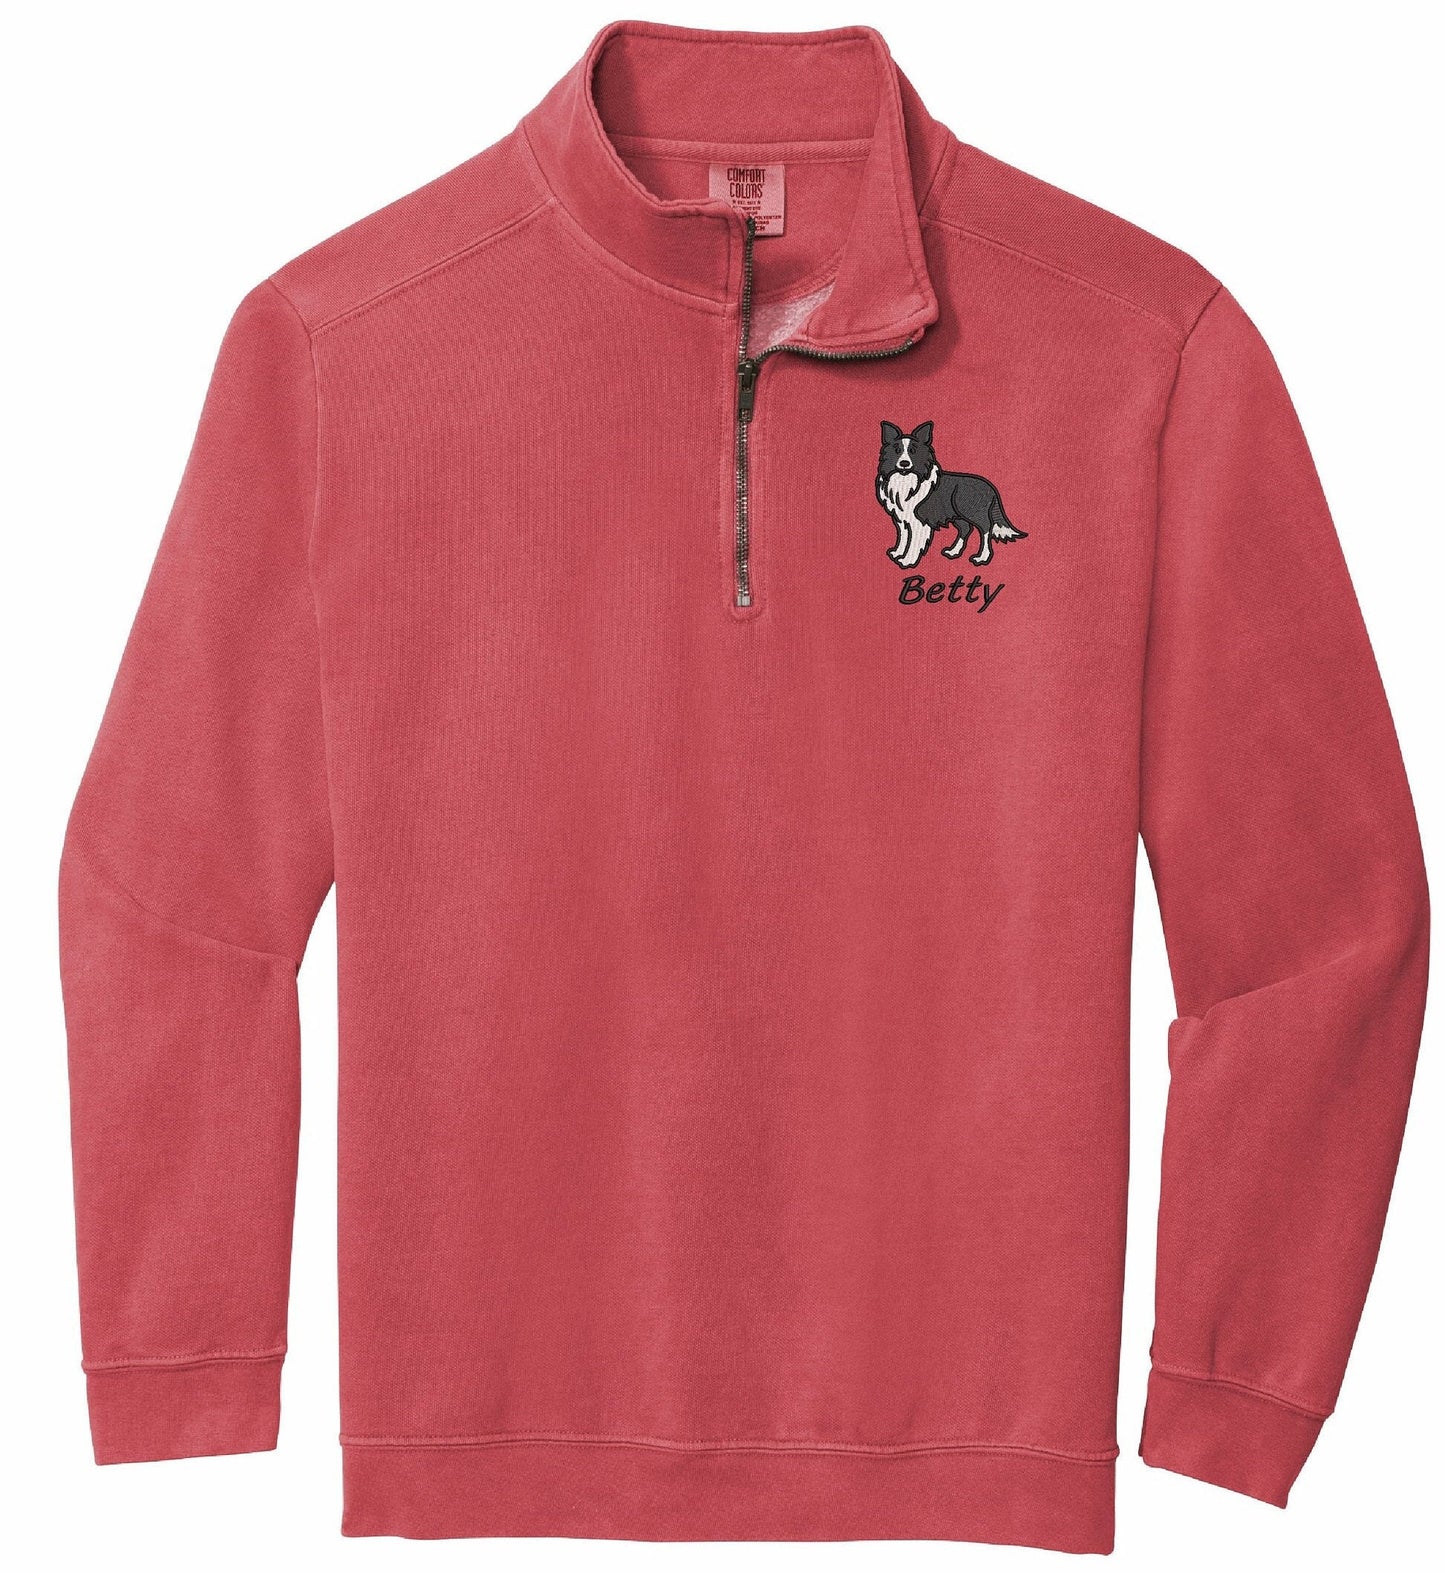 Border Collie Sweatshirt Quarter Zip Personalized Custom Embroidered With Name